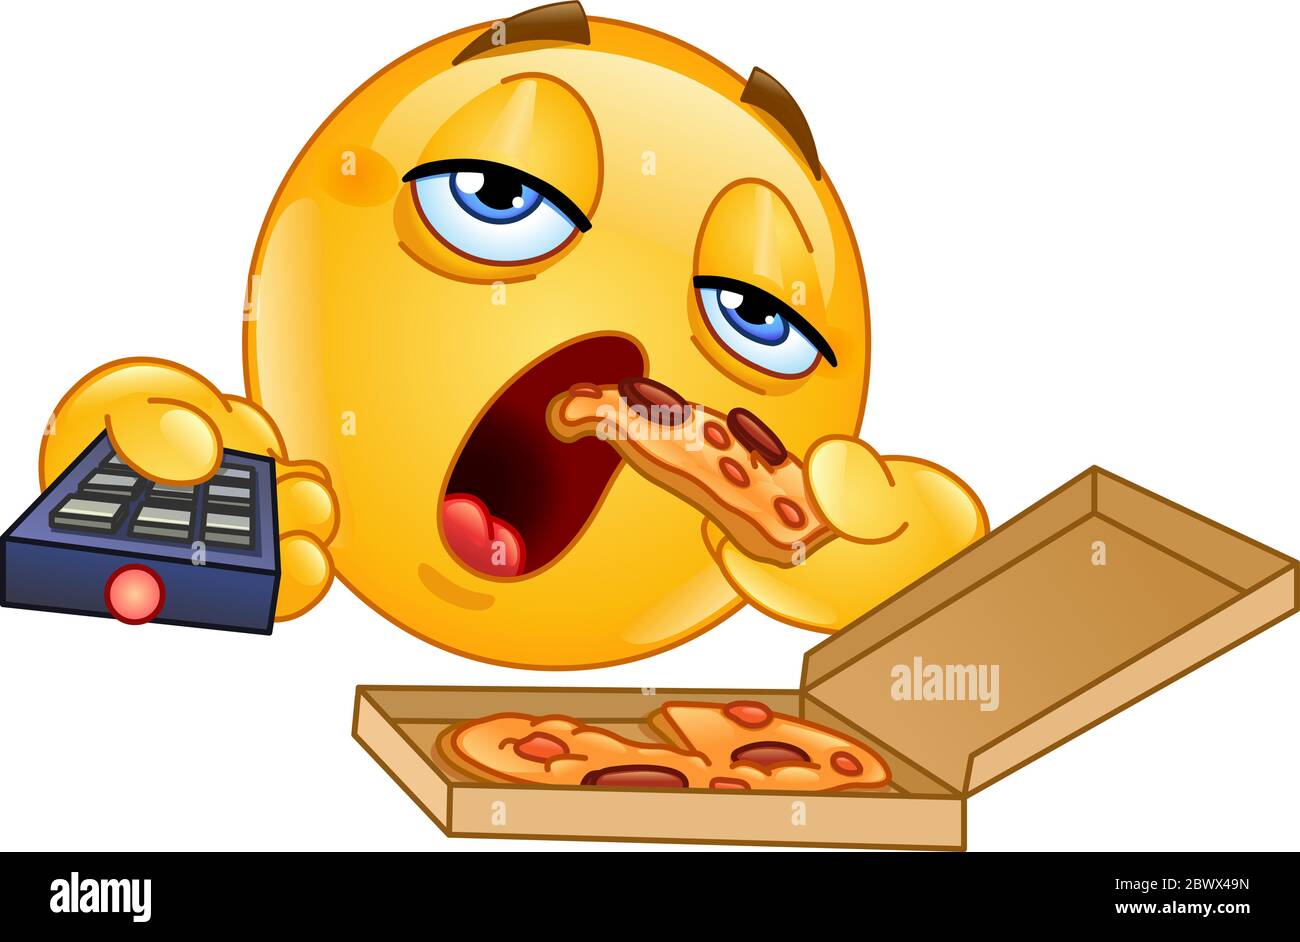 Couch potato slob emoticon watching TV and eating pizza Stock Vector